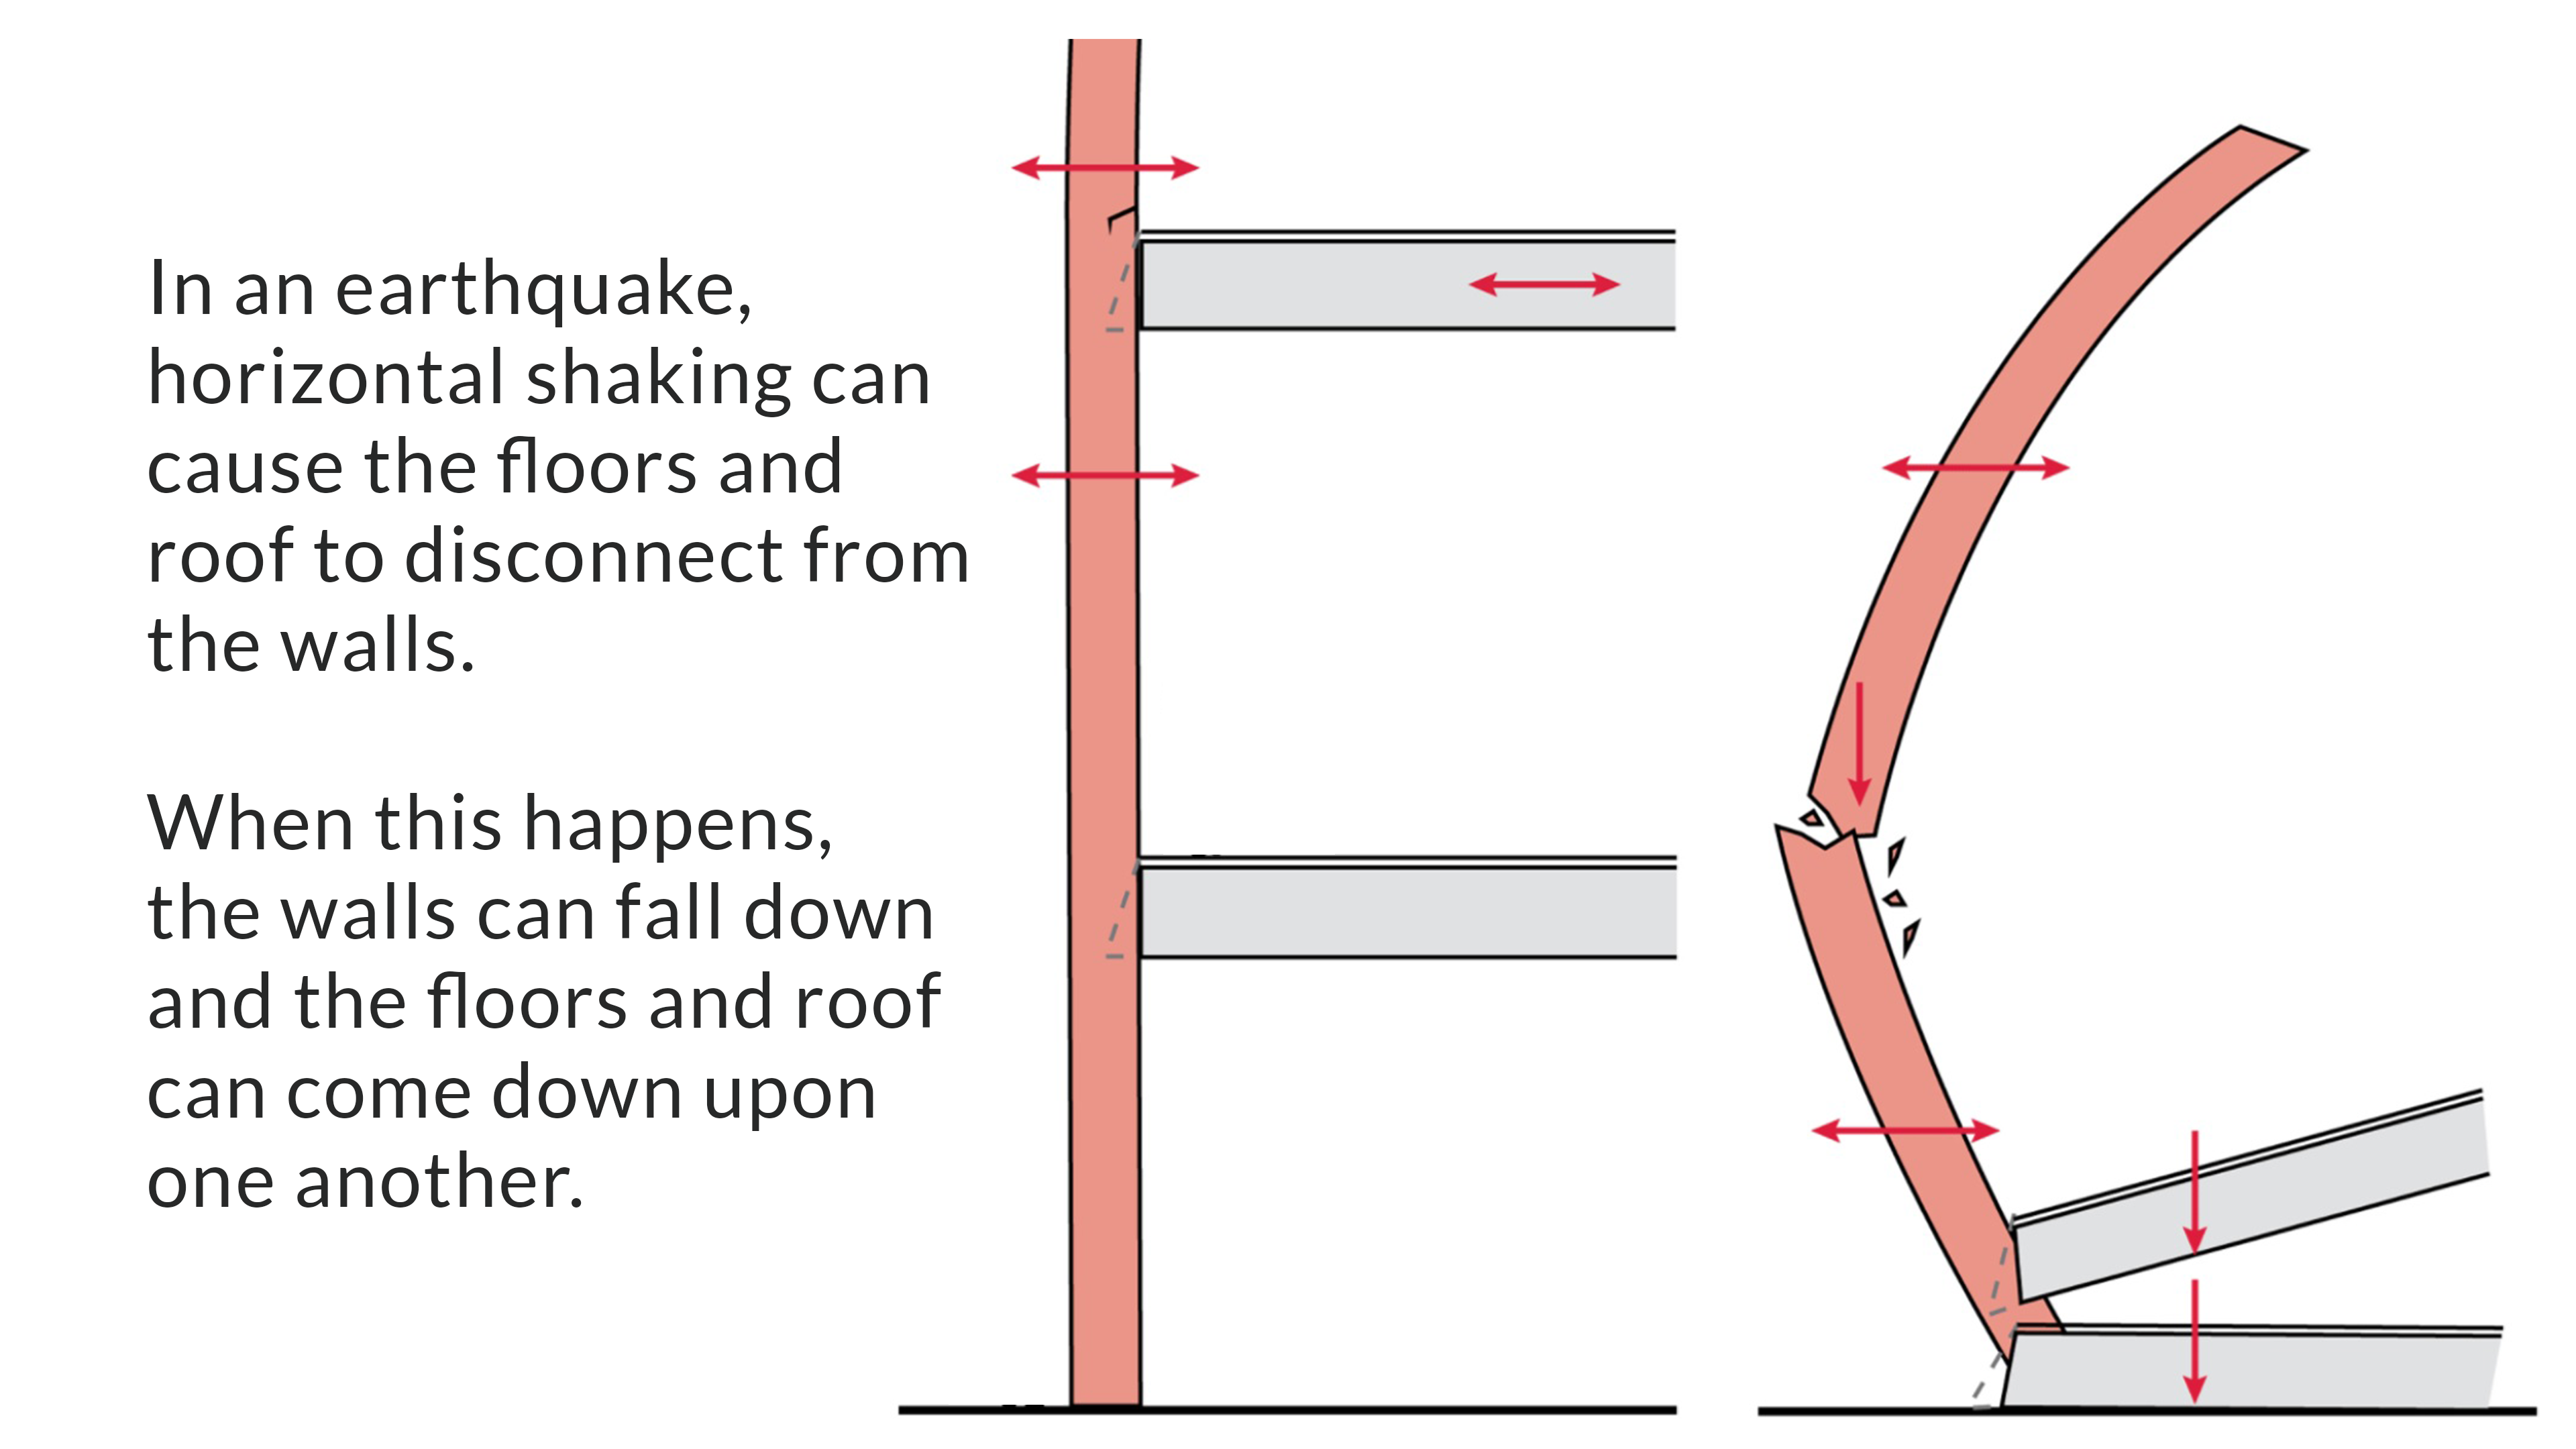 Diagram showing the affects of an earthquake on an unreinforced masonry building